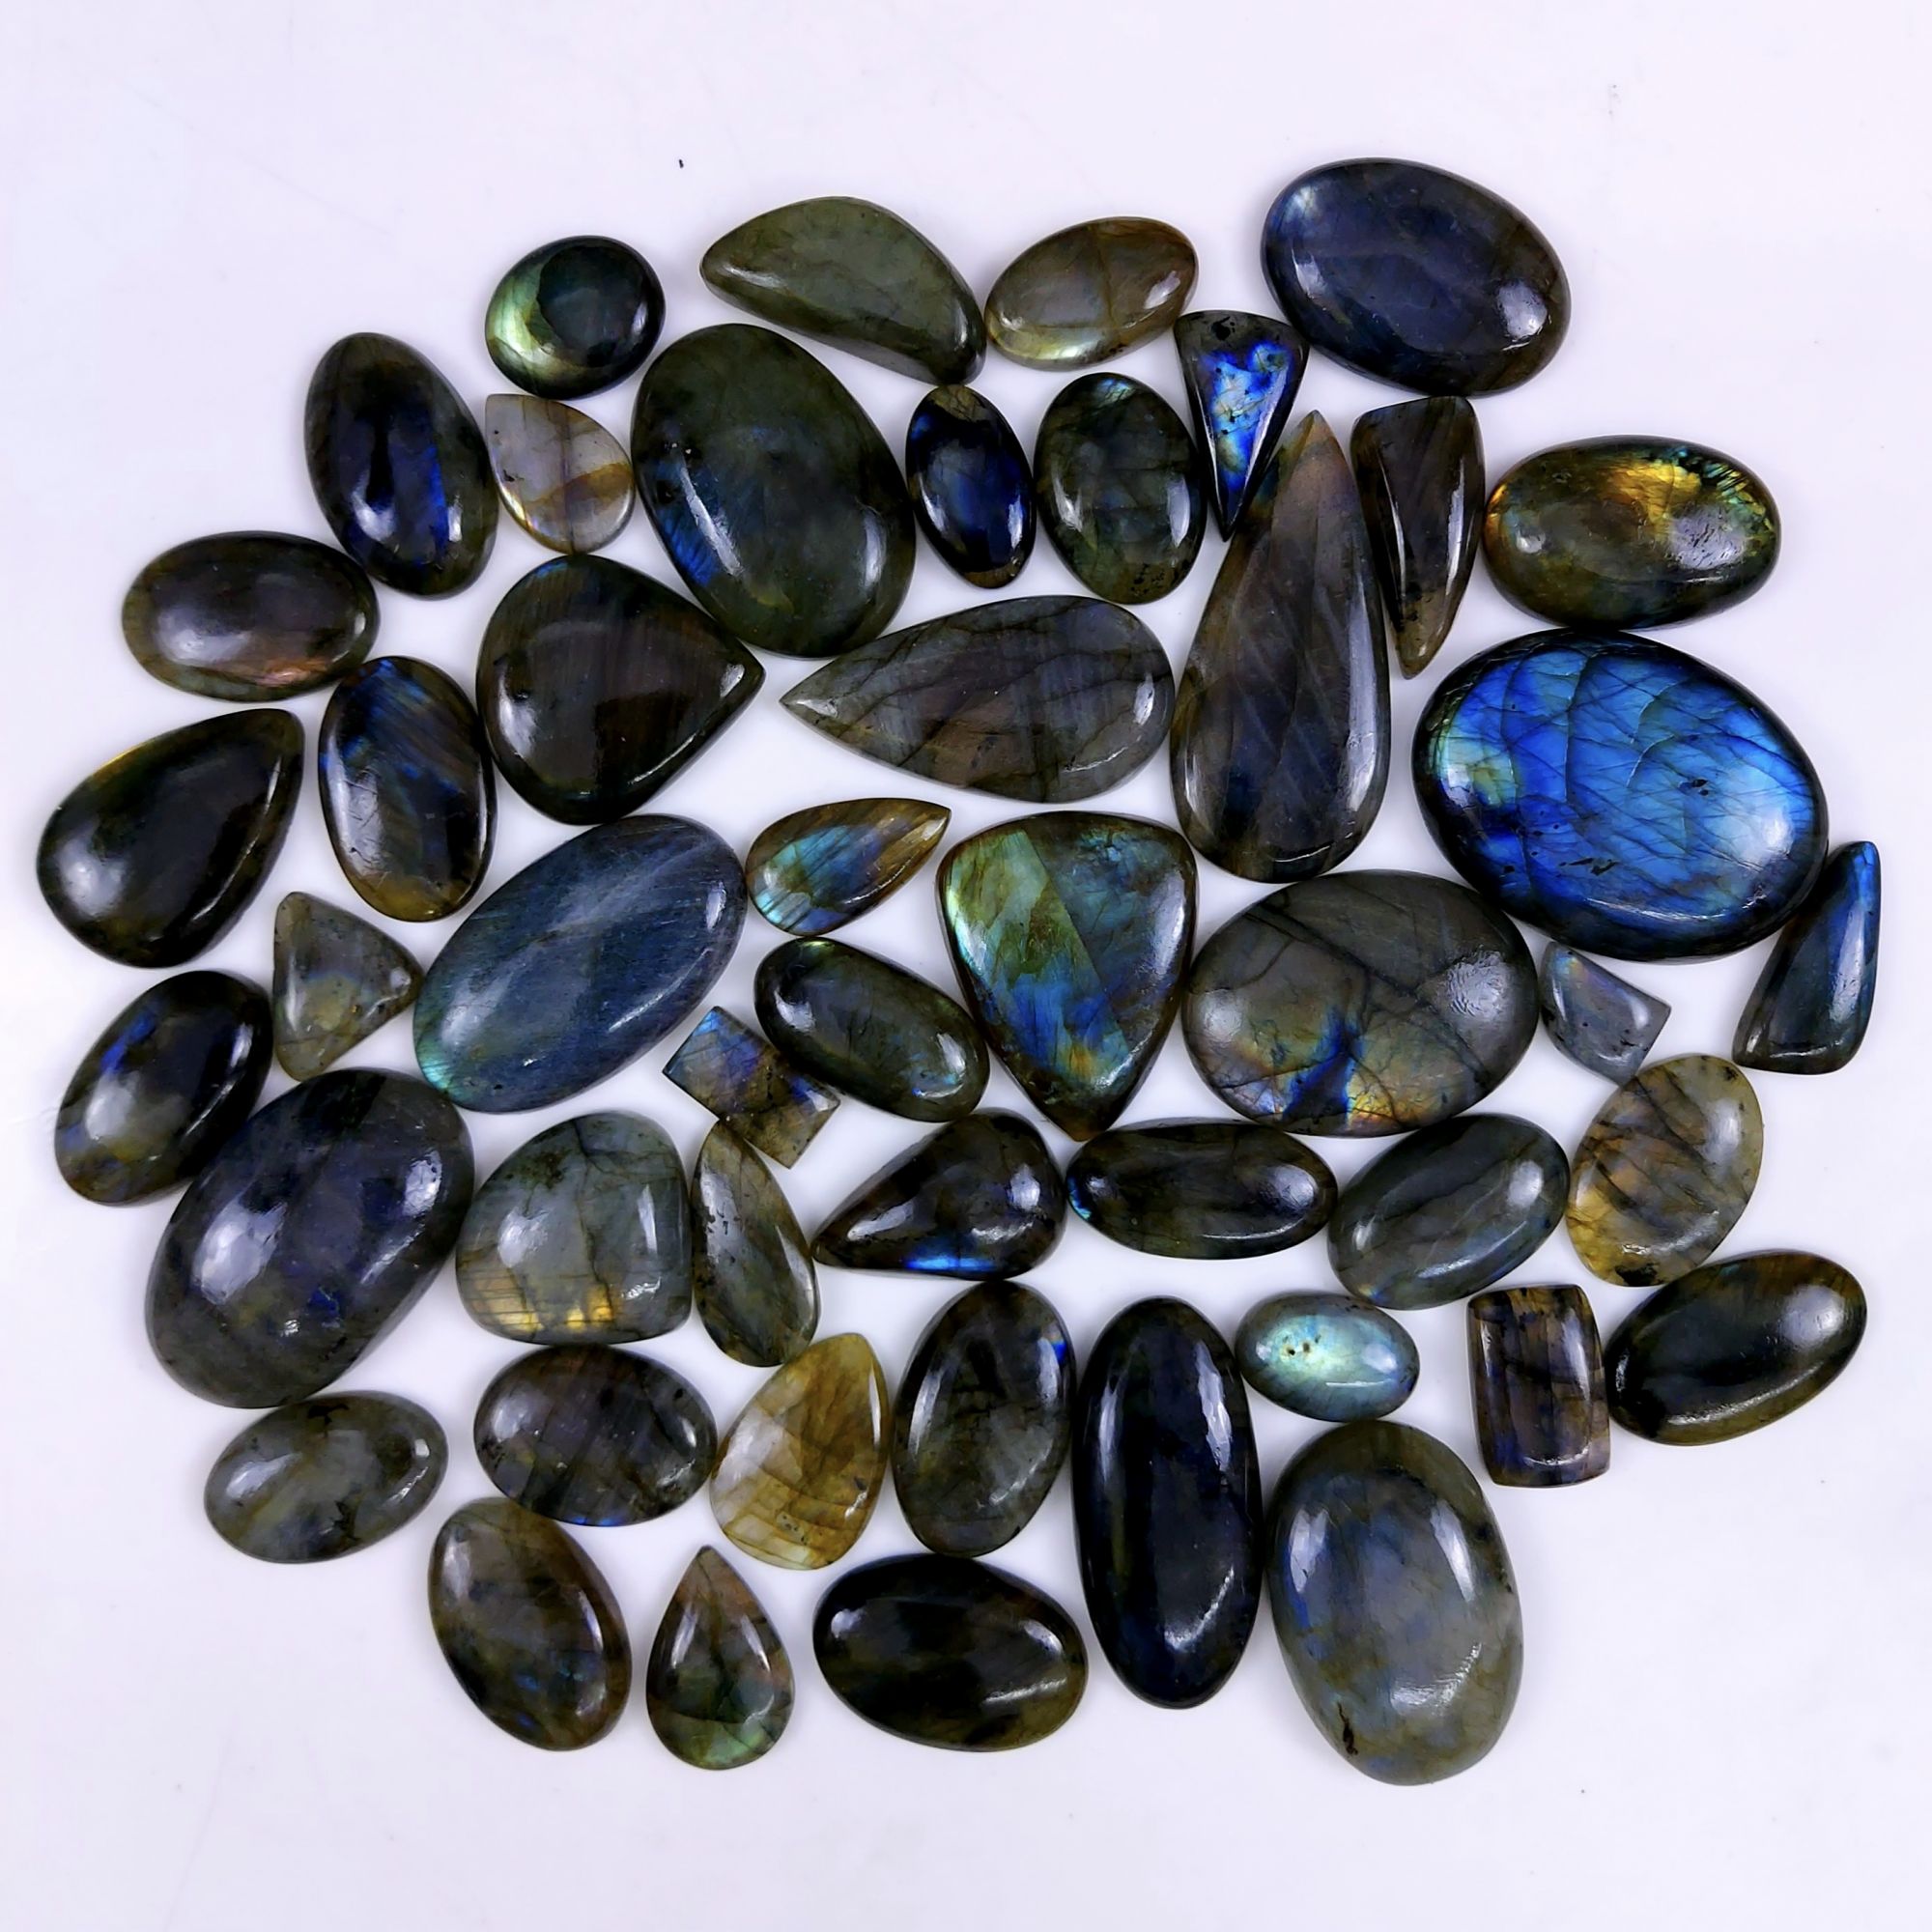 48pc 1735Cts Labradorite Cabochon Multifire Healing Crystal For Jewelry Supplies, Labradorite Necklace Handmade Wire Wrapped Gemstone Pendant 50x25 14x12mm#6295